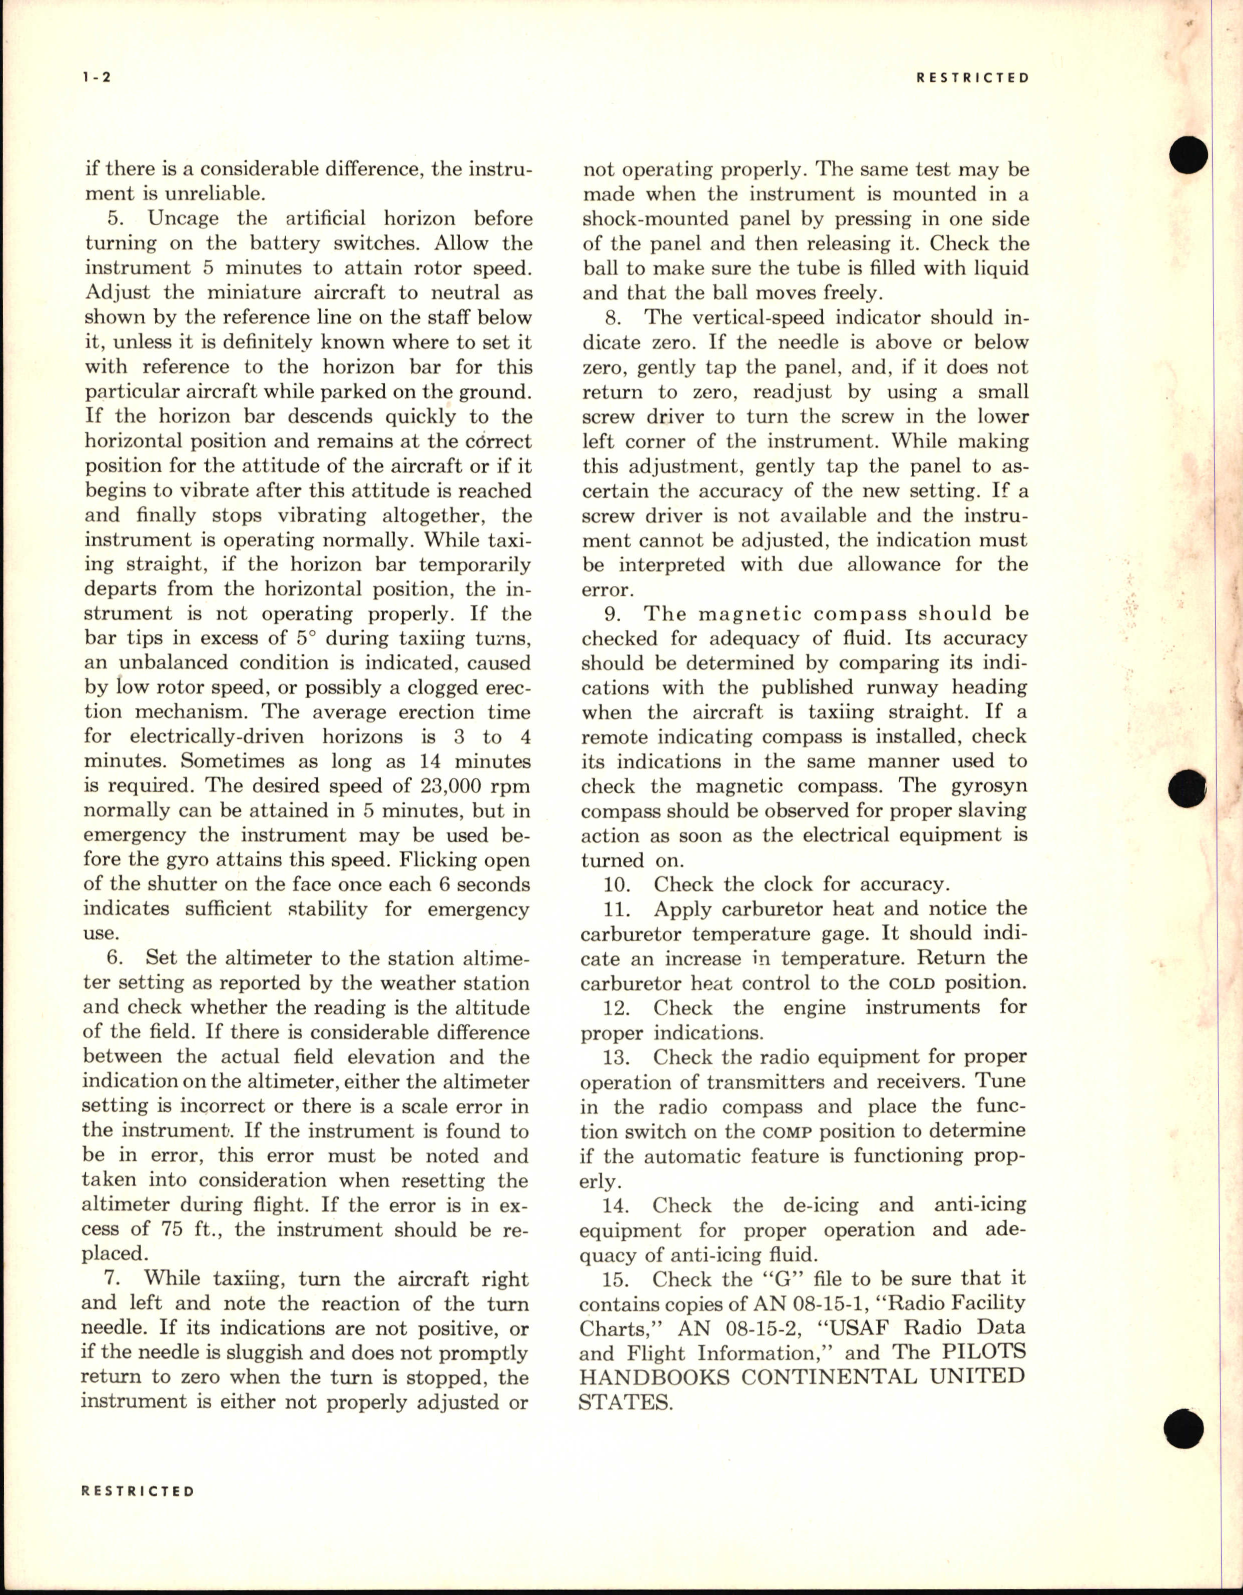 Sample page 6 from AirCorps Library document: Instrument Flying Techniques and Procedures